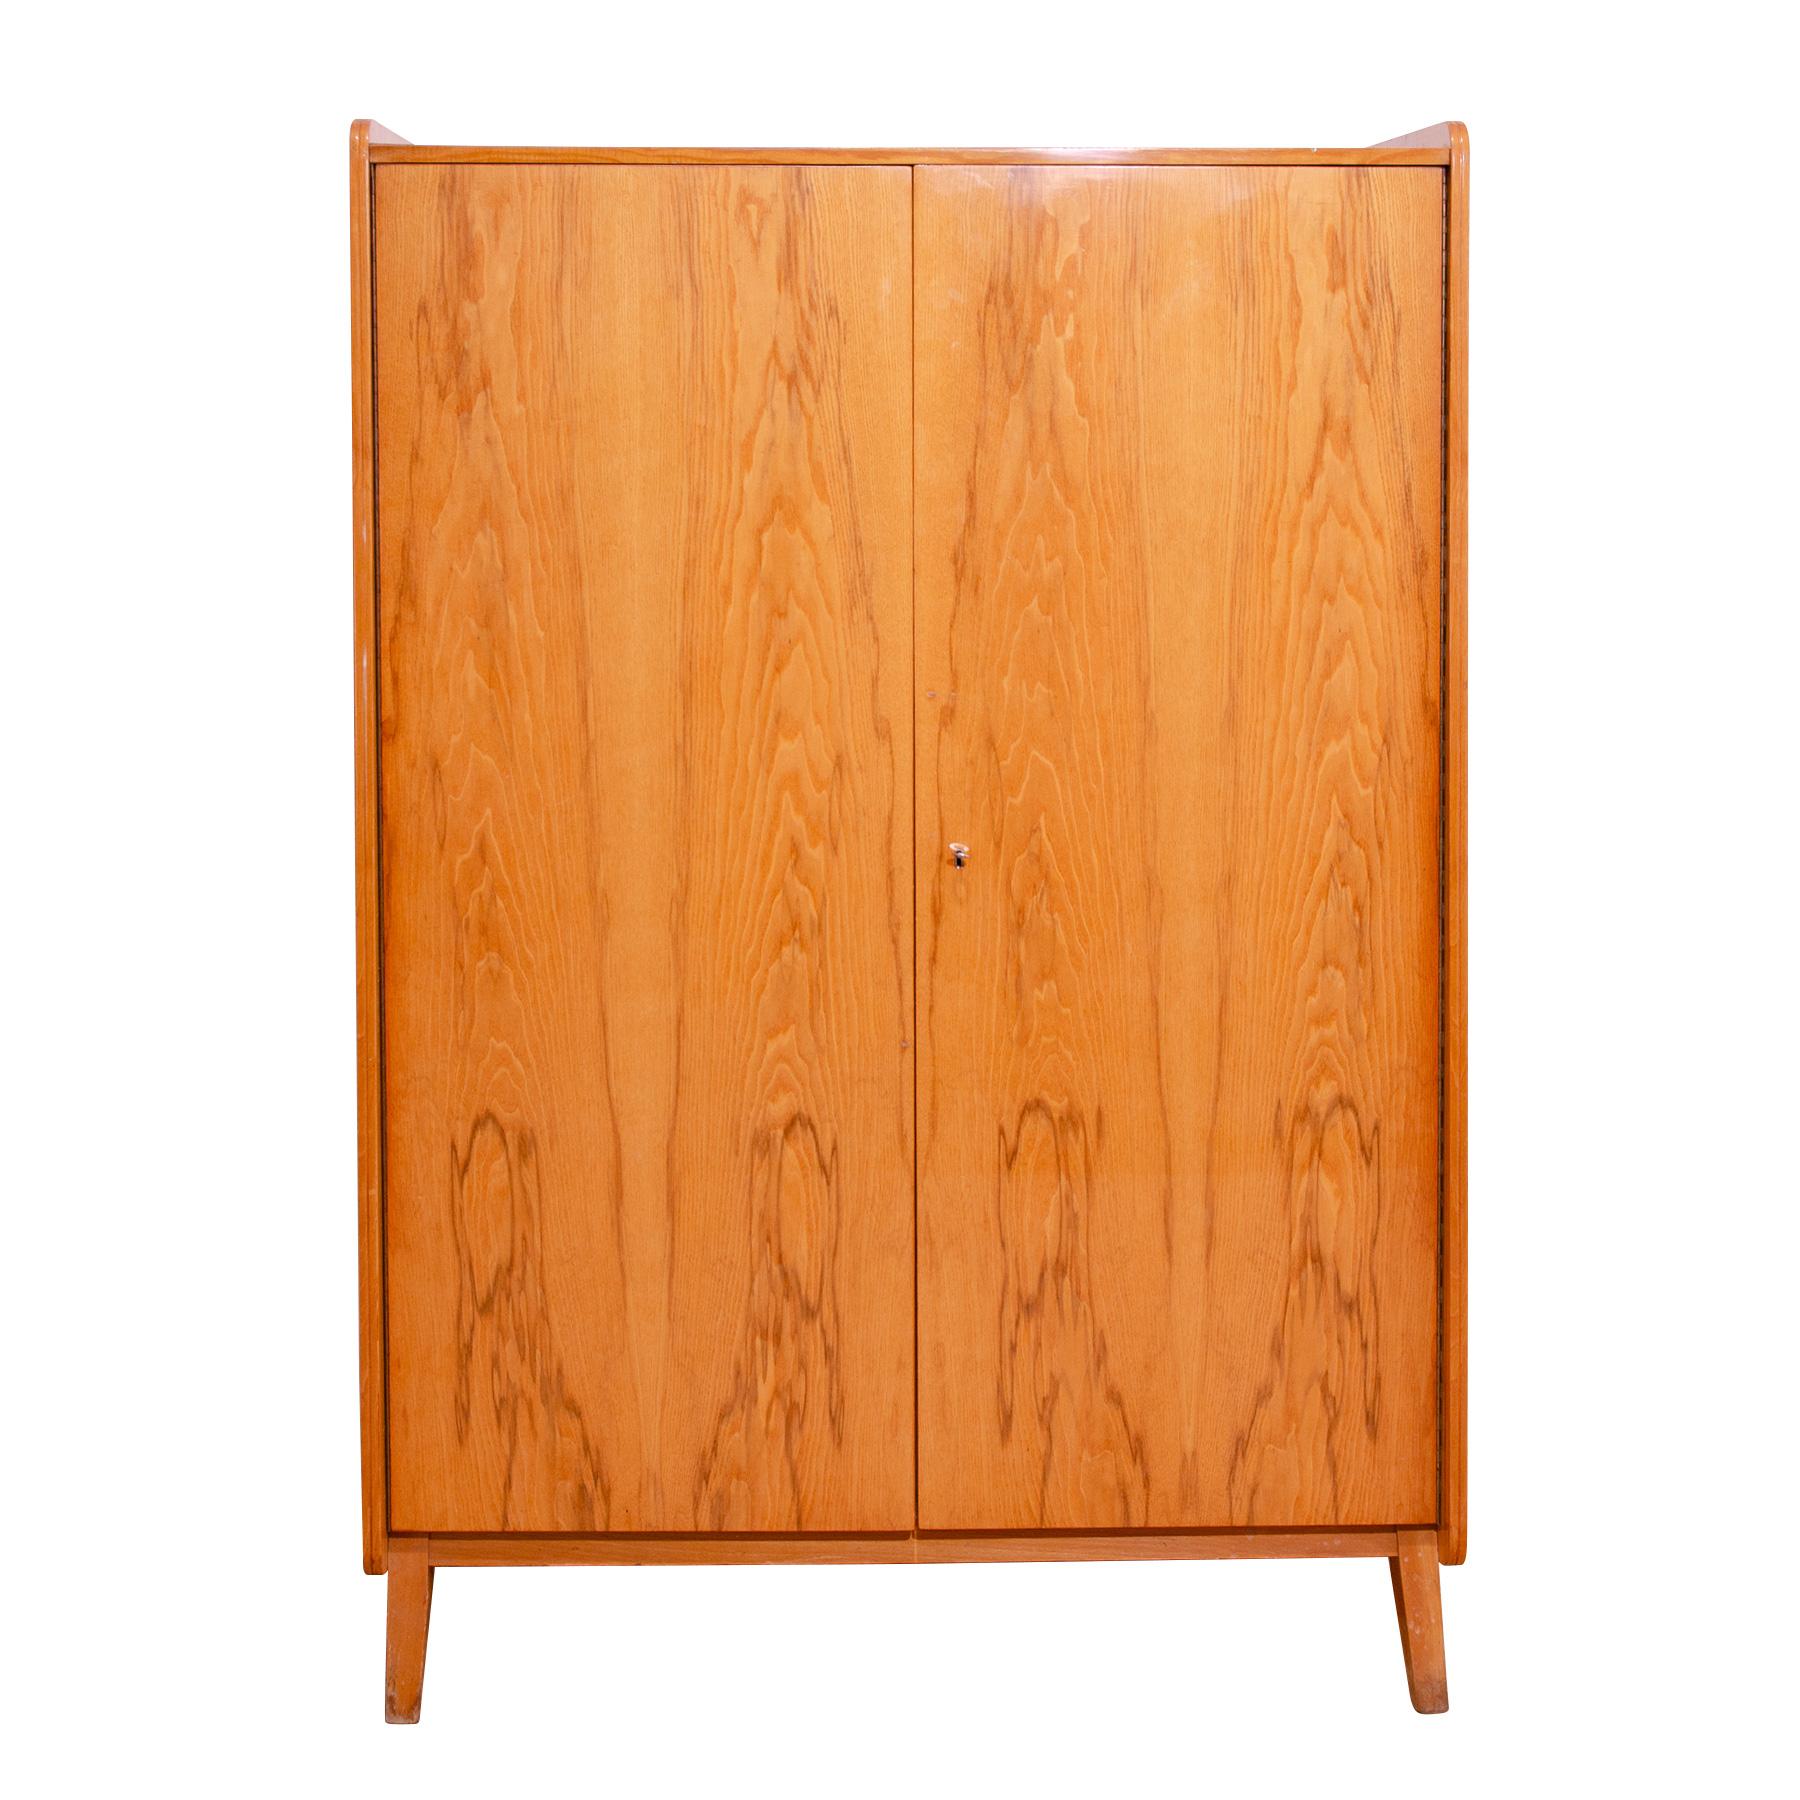 This wardrobe was designed by František Jirák for Tatra nábytok company in the former Czechoslovakia in the 1960´s

It´s made of beechwood and plywood.

You can hang your clothes in it,  place underwear, etc.

In good Vintage condition, showing